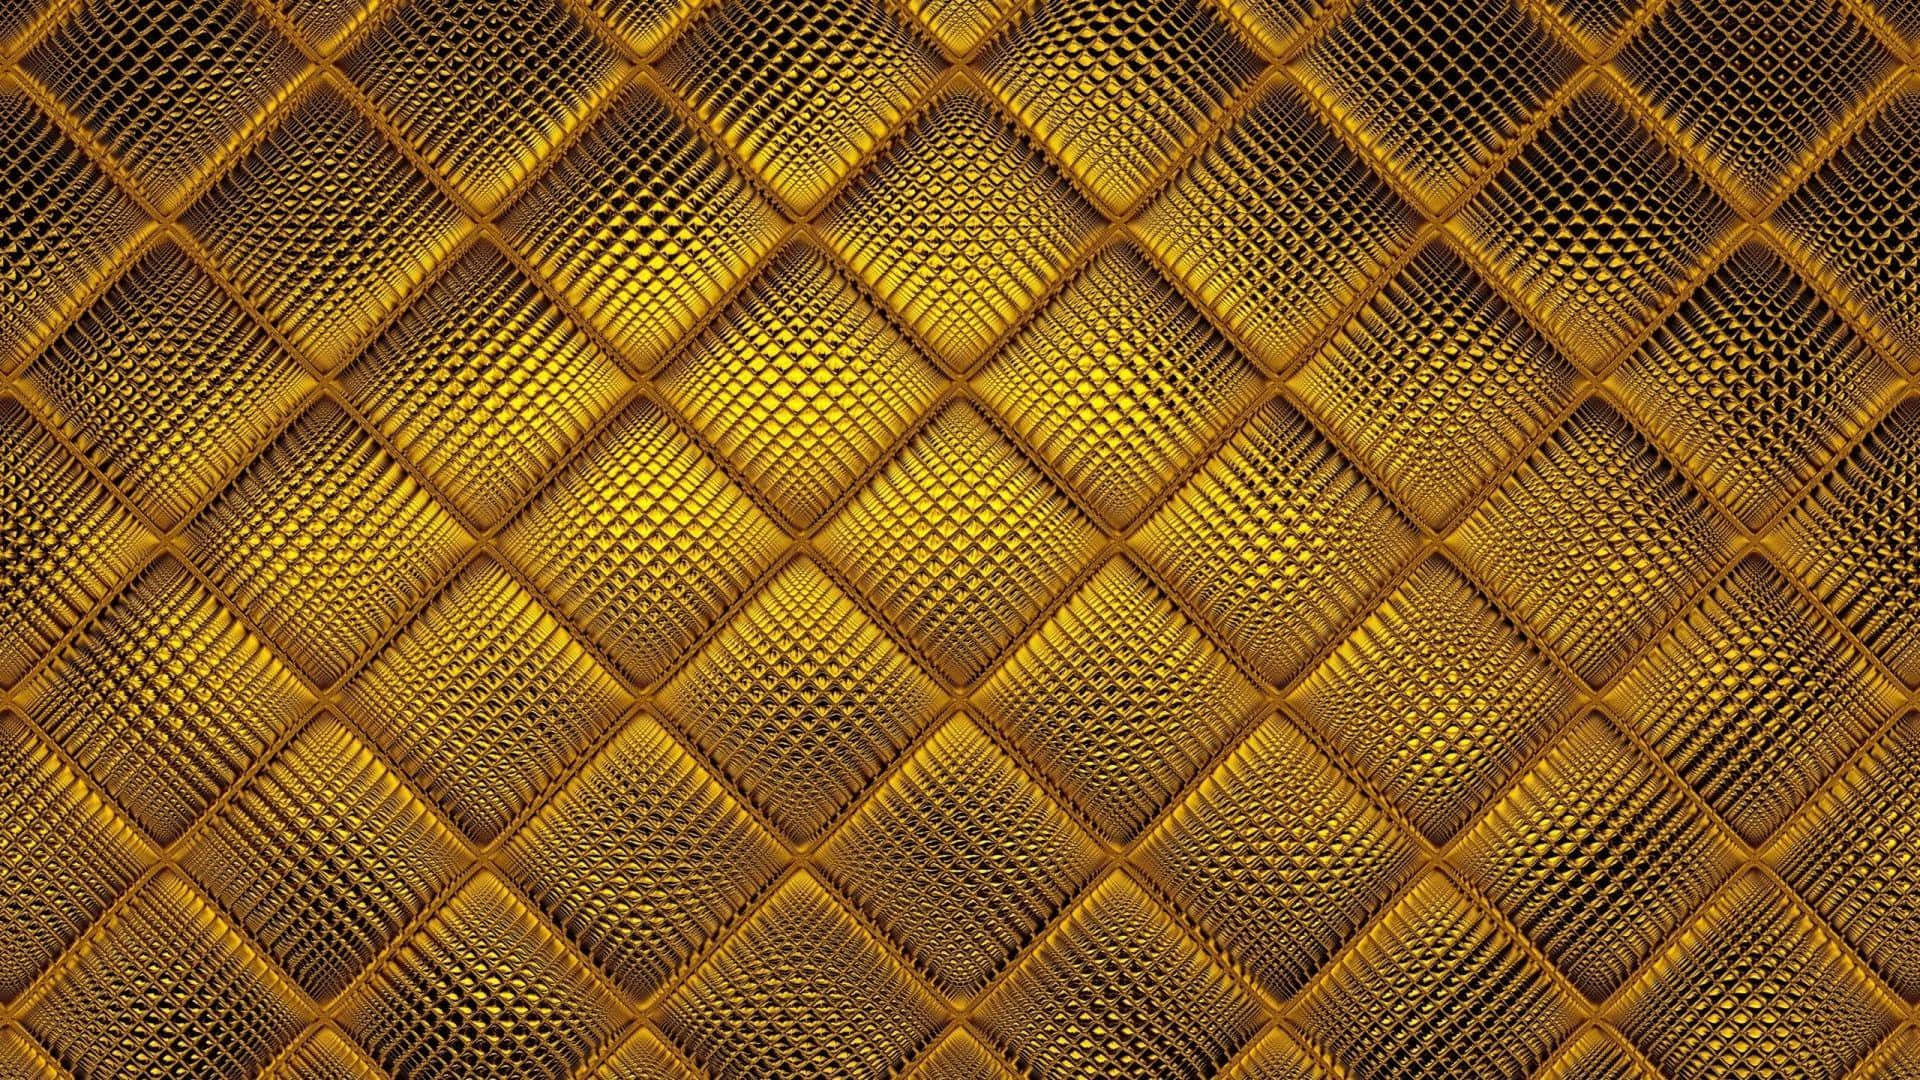 Gold Texture Pictures 1920 X 1080 Picture